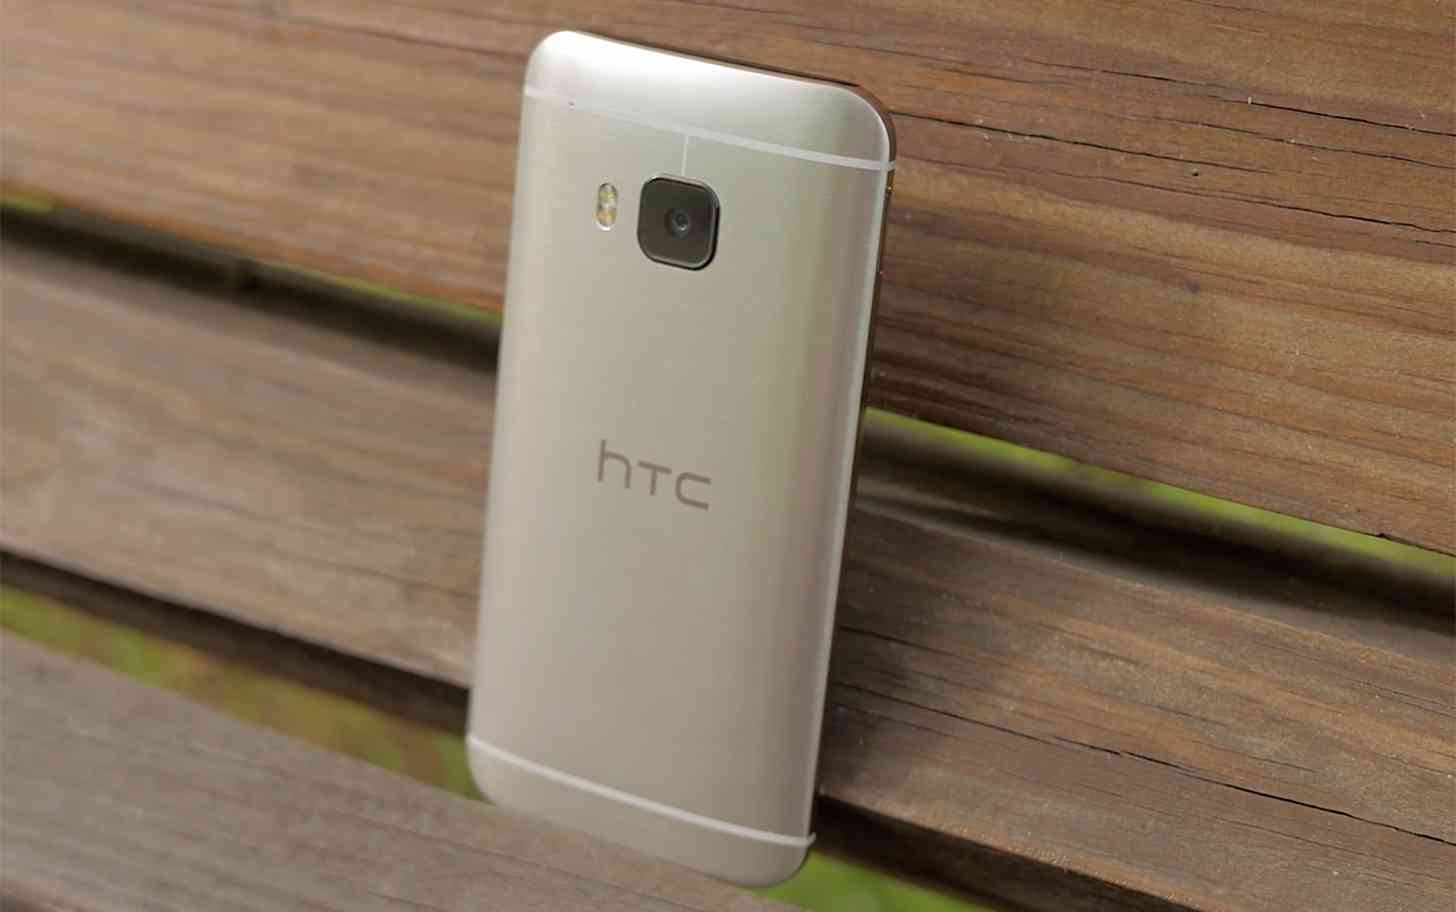 HTC One M9 hands-on